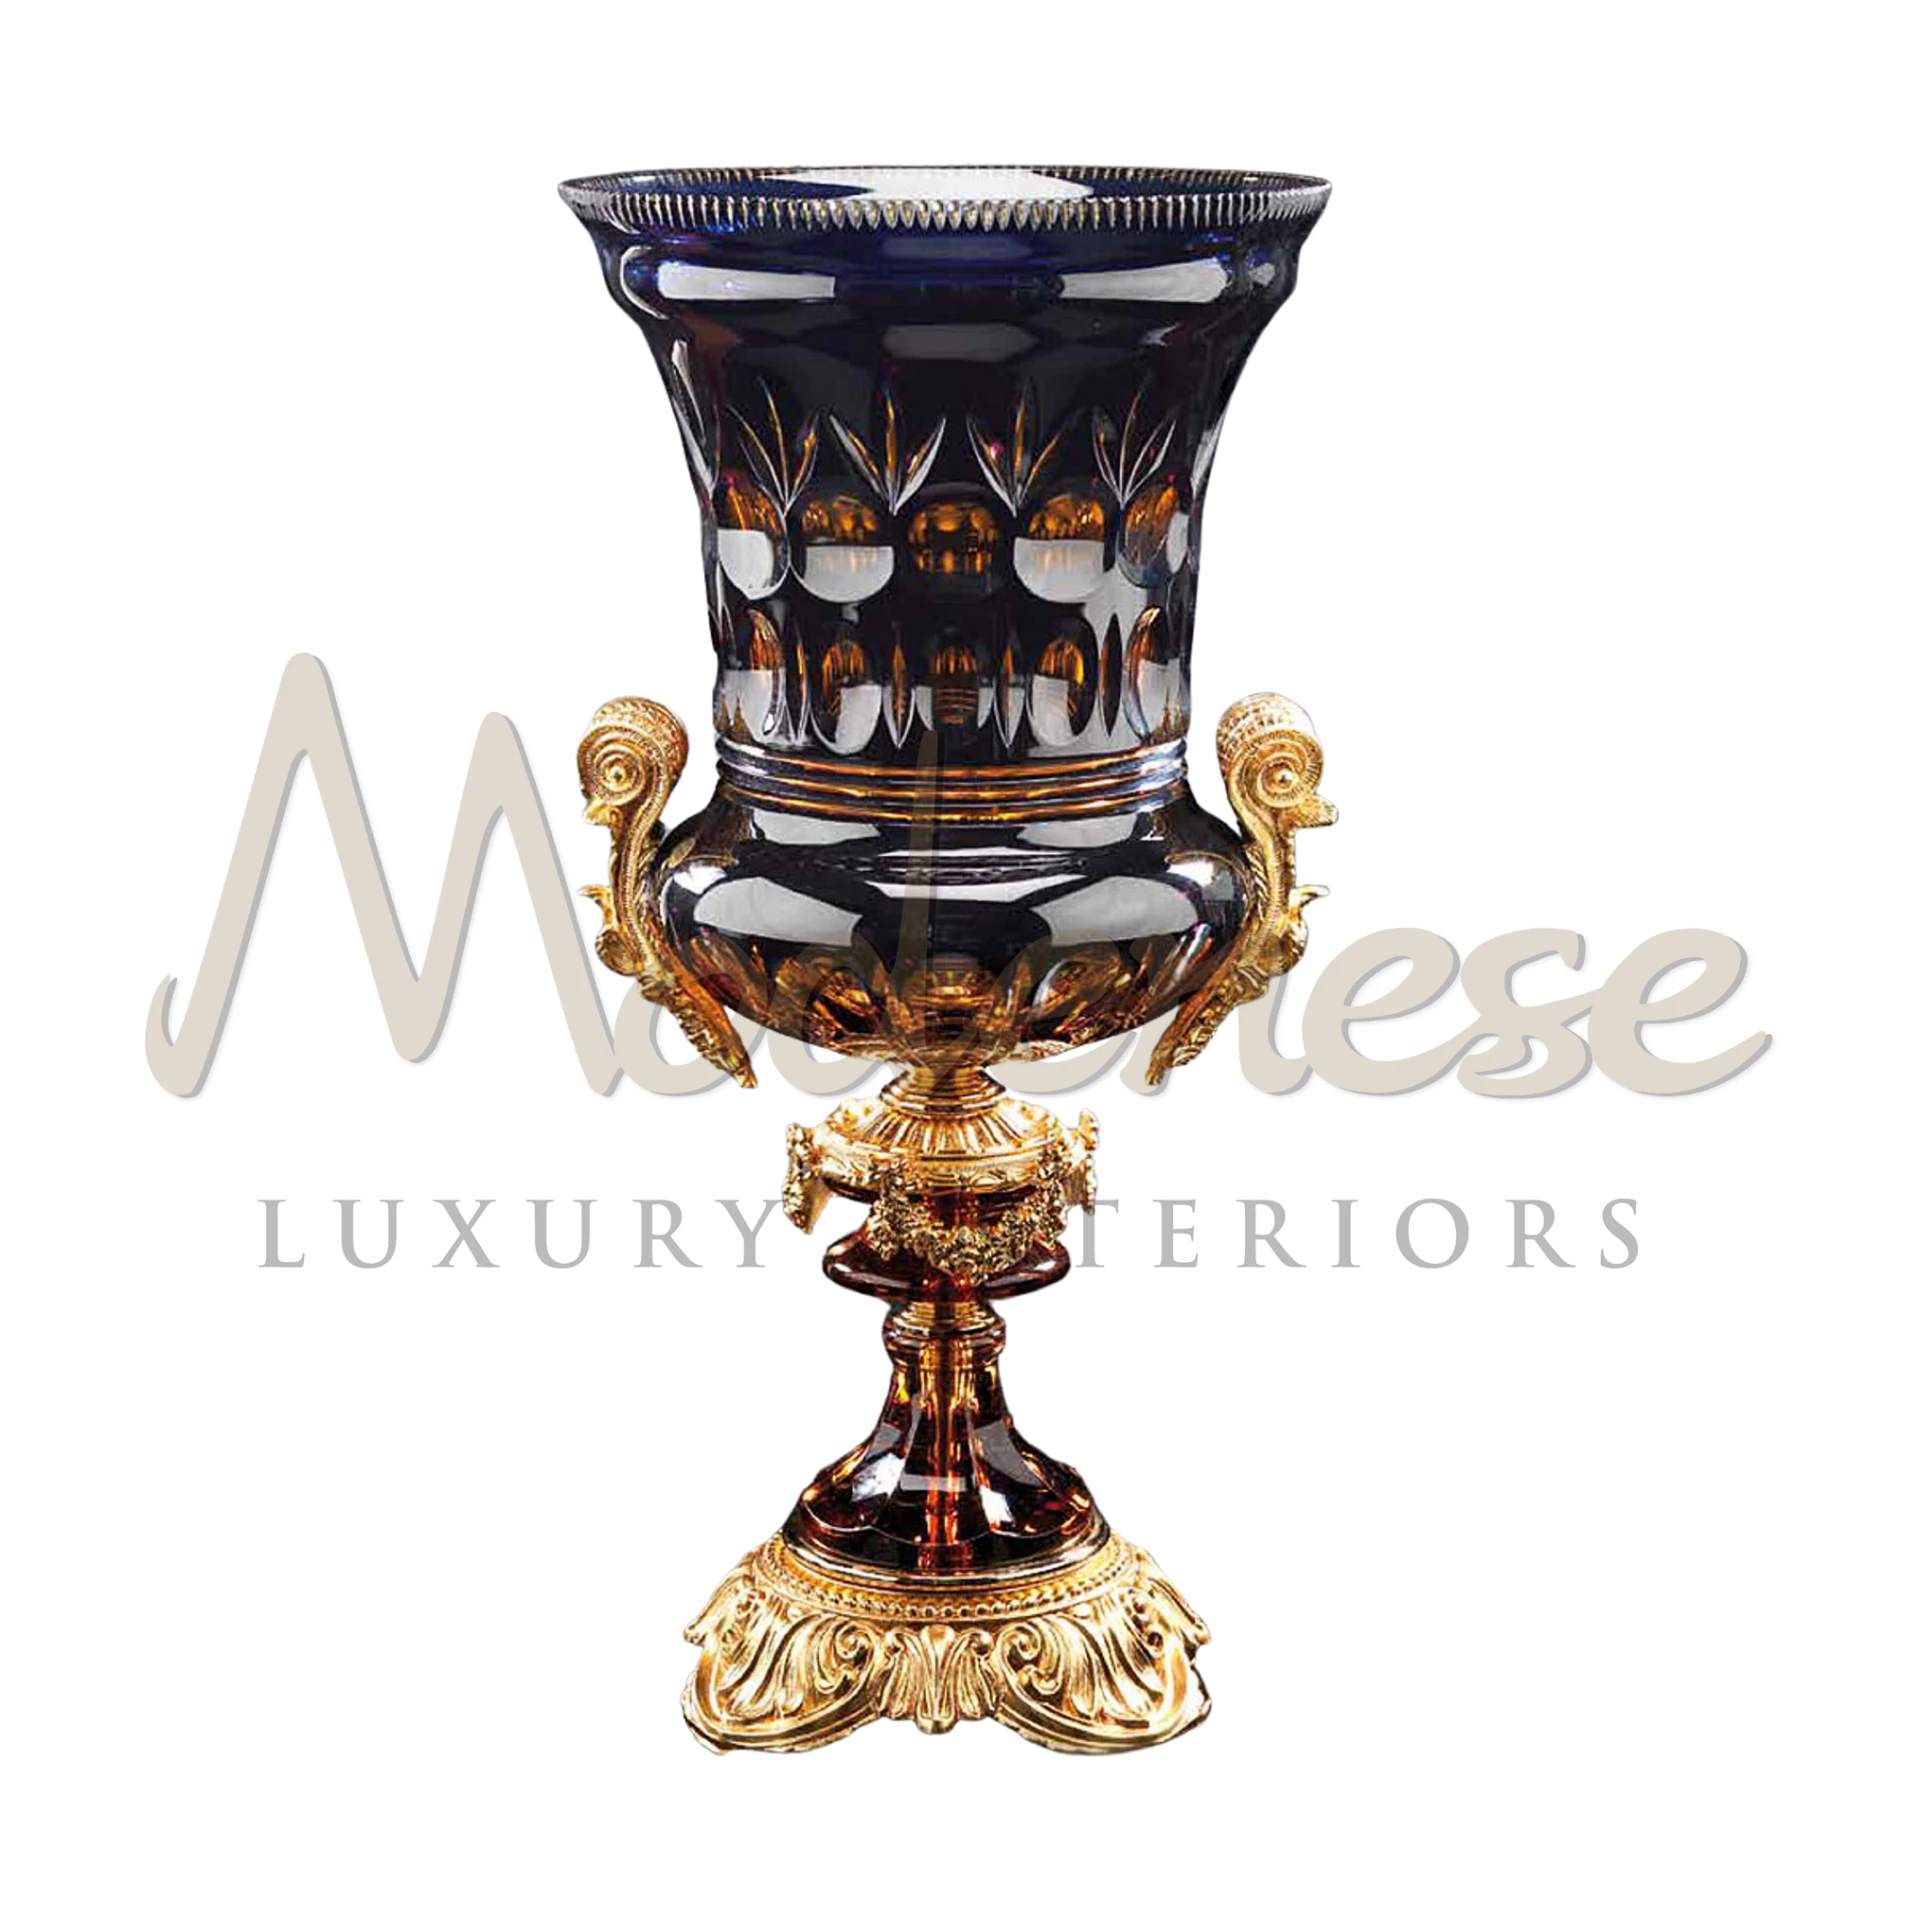 Elegant Traditional Figured Glass Vase by Modenese, with classic ornate patterns, enhancing any luxury interior design.